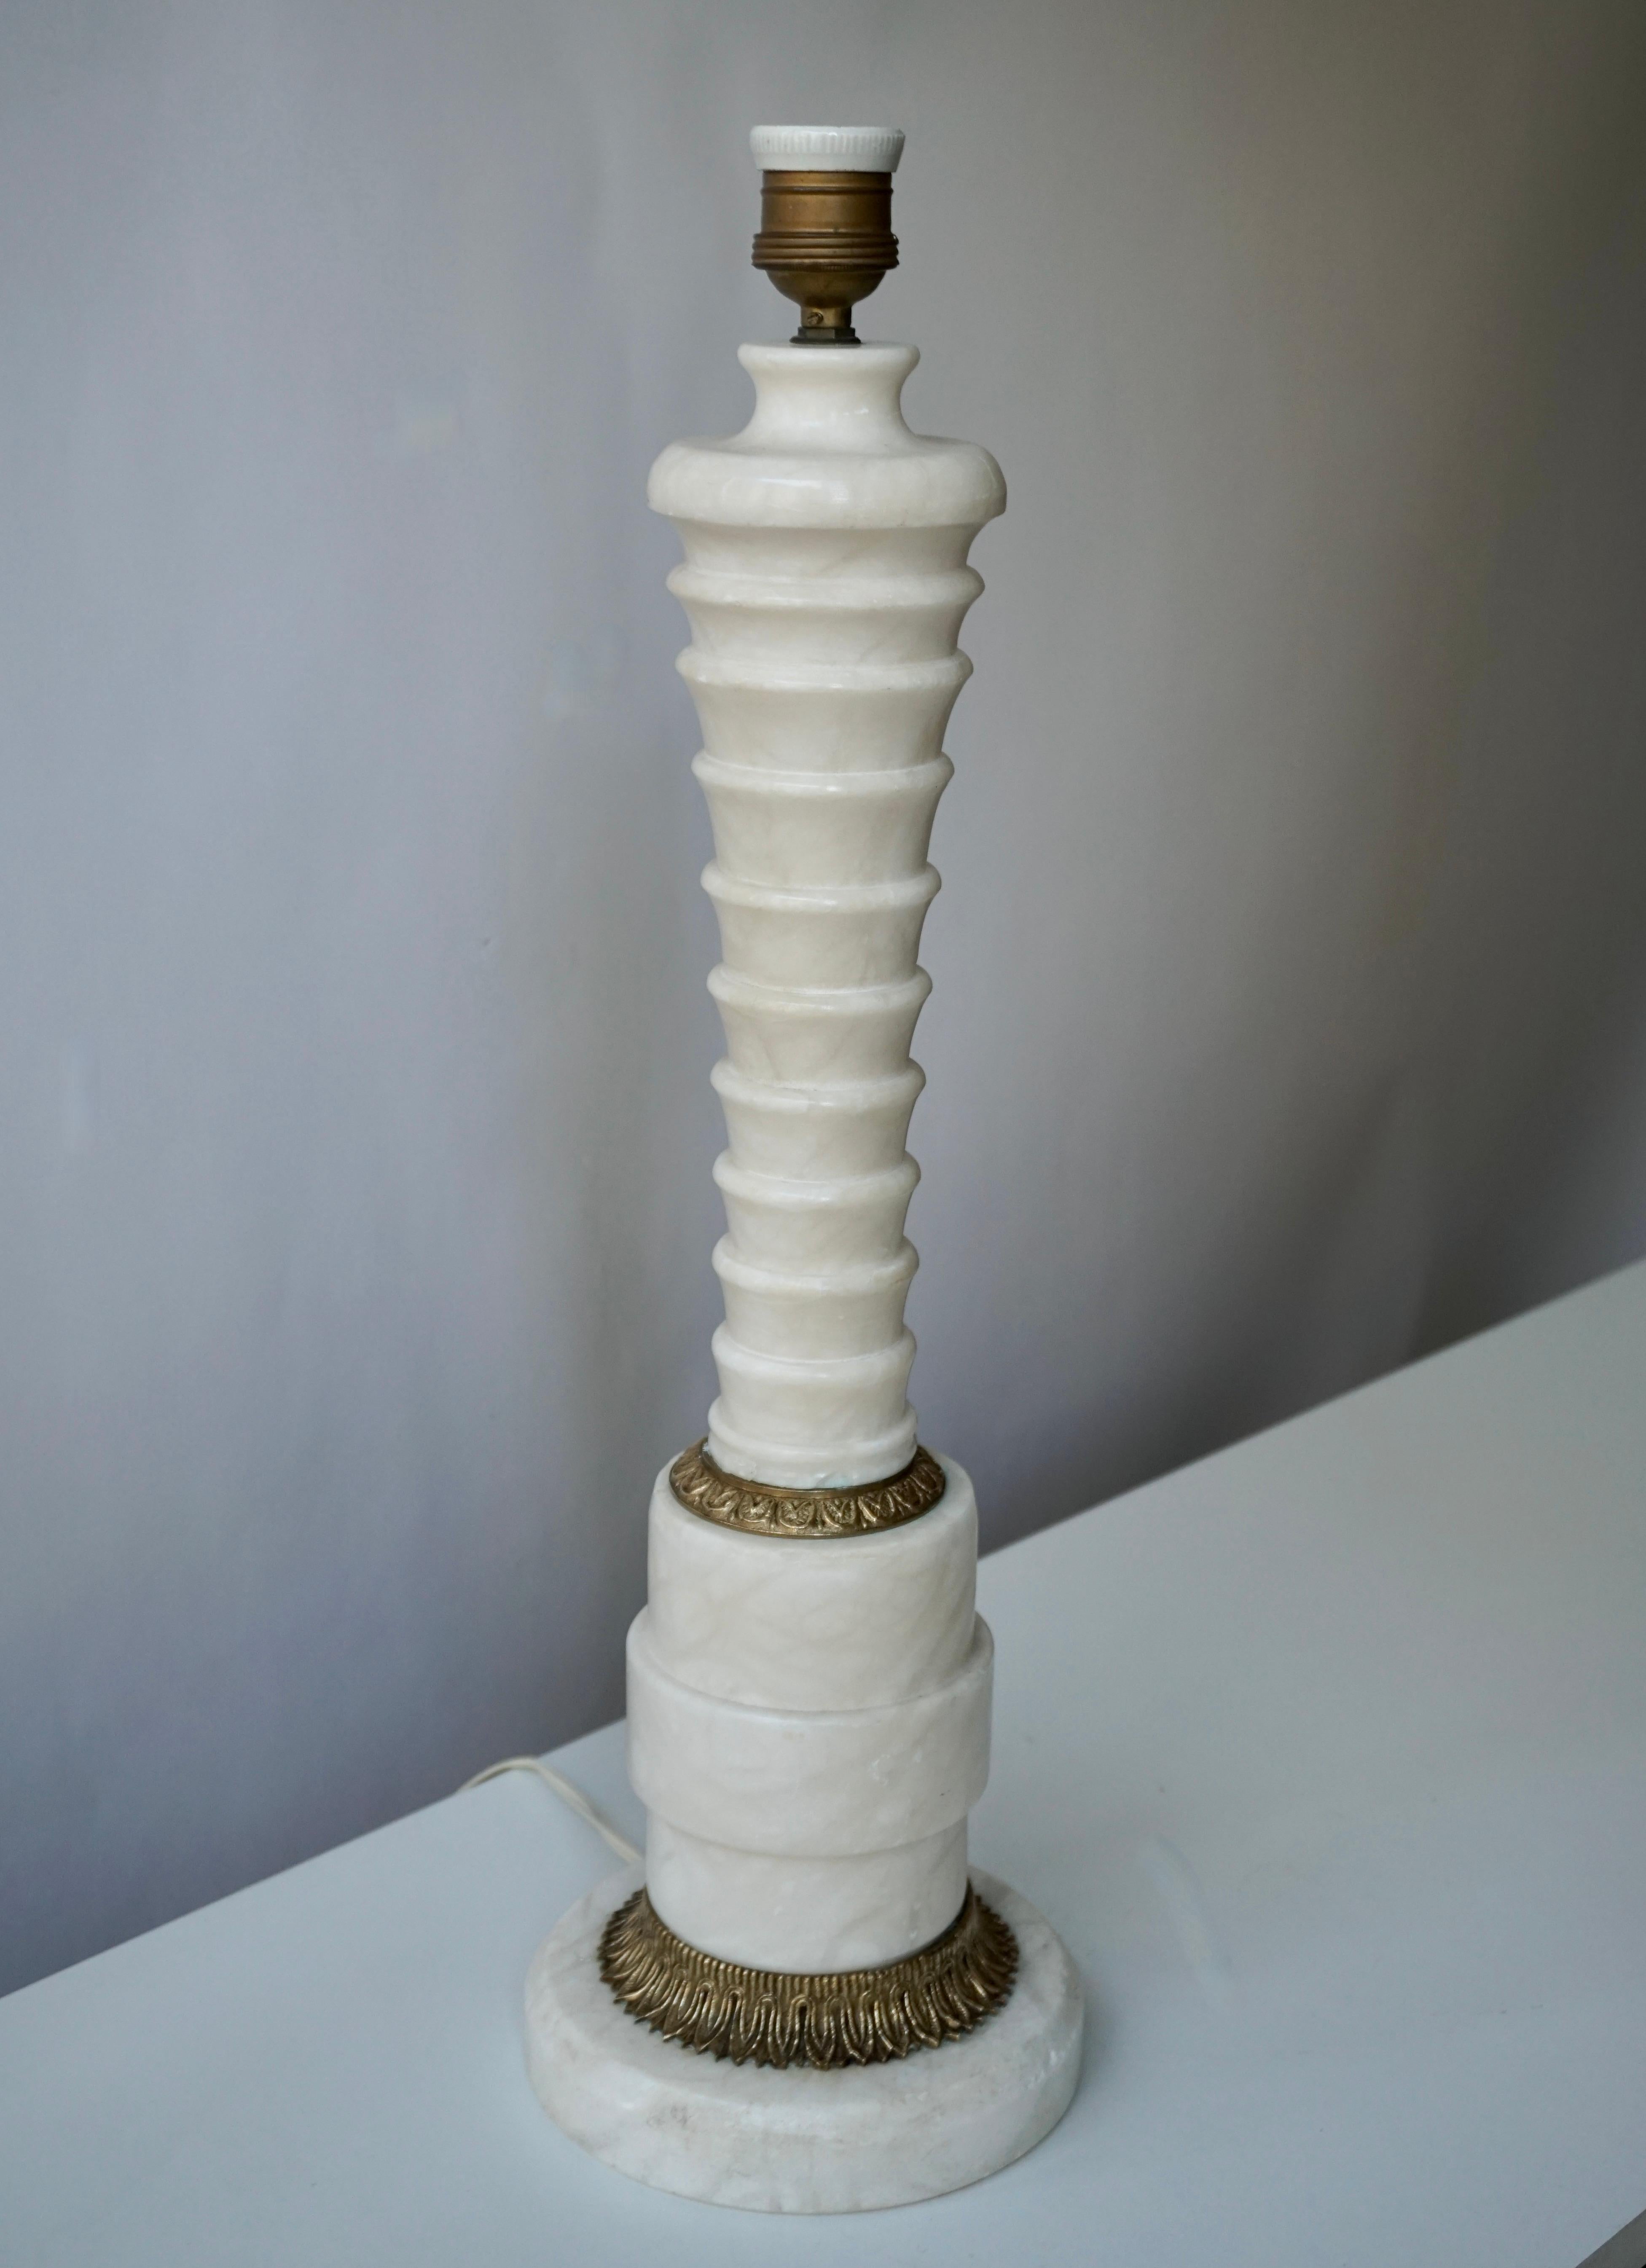 Italian brass and marble table lamp.

Measures: Diameter 16 cm.
Height 54 cm.
Weight 7 kg.